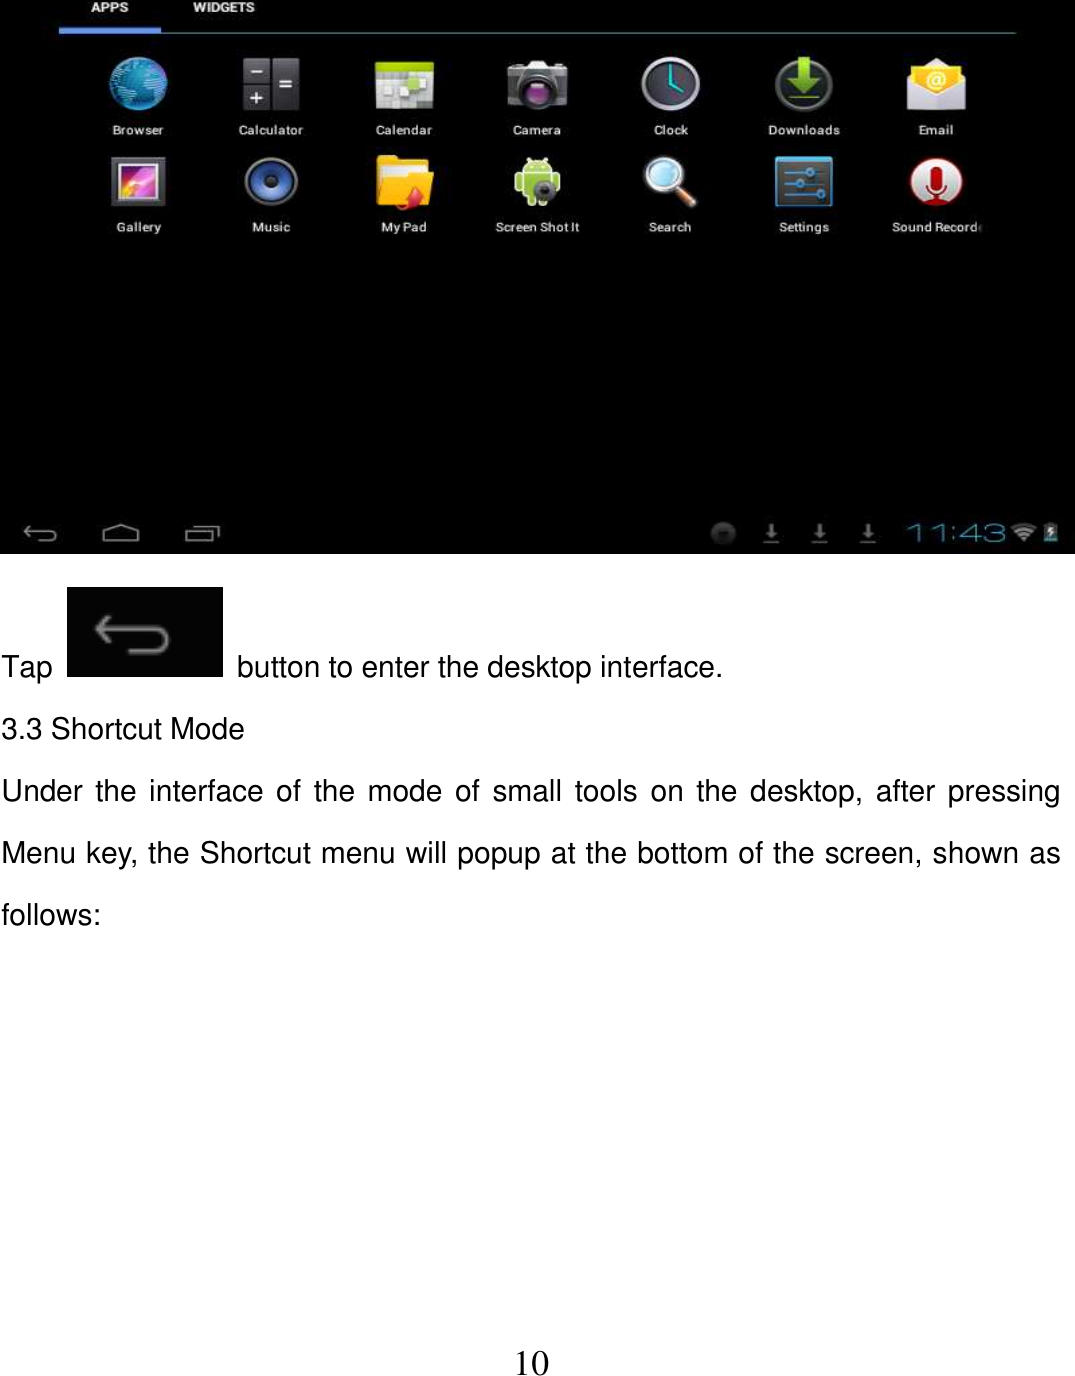   10  Tap    button to enter the desktop interface. 3.3 Shortcut Mode Under the interface of the mode of small tools on the desktop, after pressing Menu key, the Shortcut menu will popup at the bottom of the screen, shown as follows:  